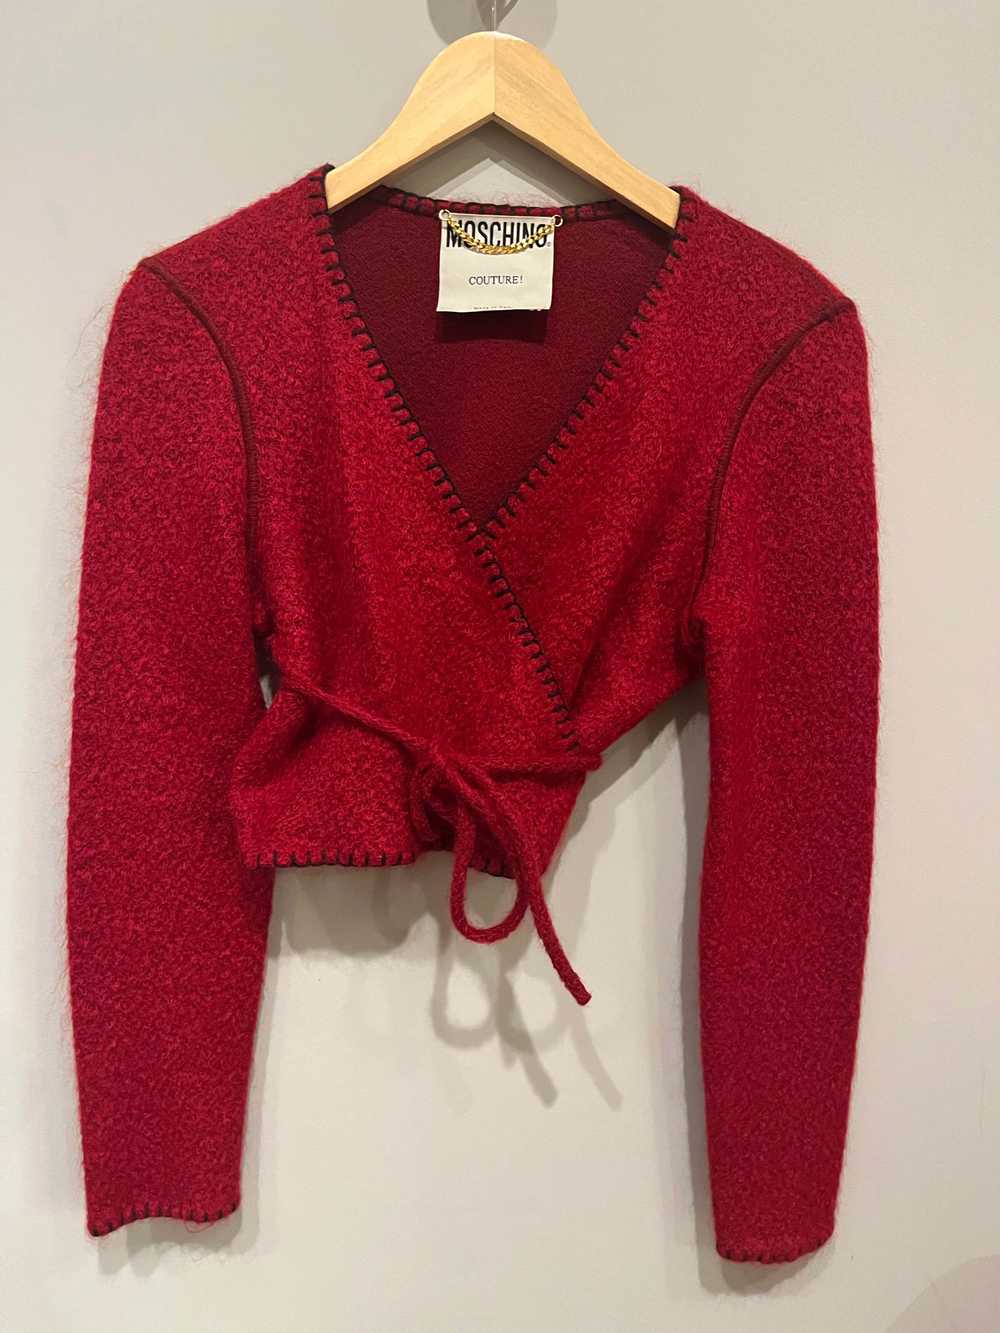 Moschino Couture red mohair blend wrap top - image 2